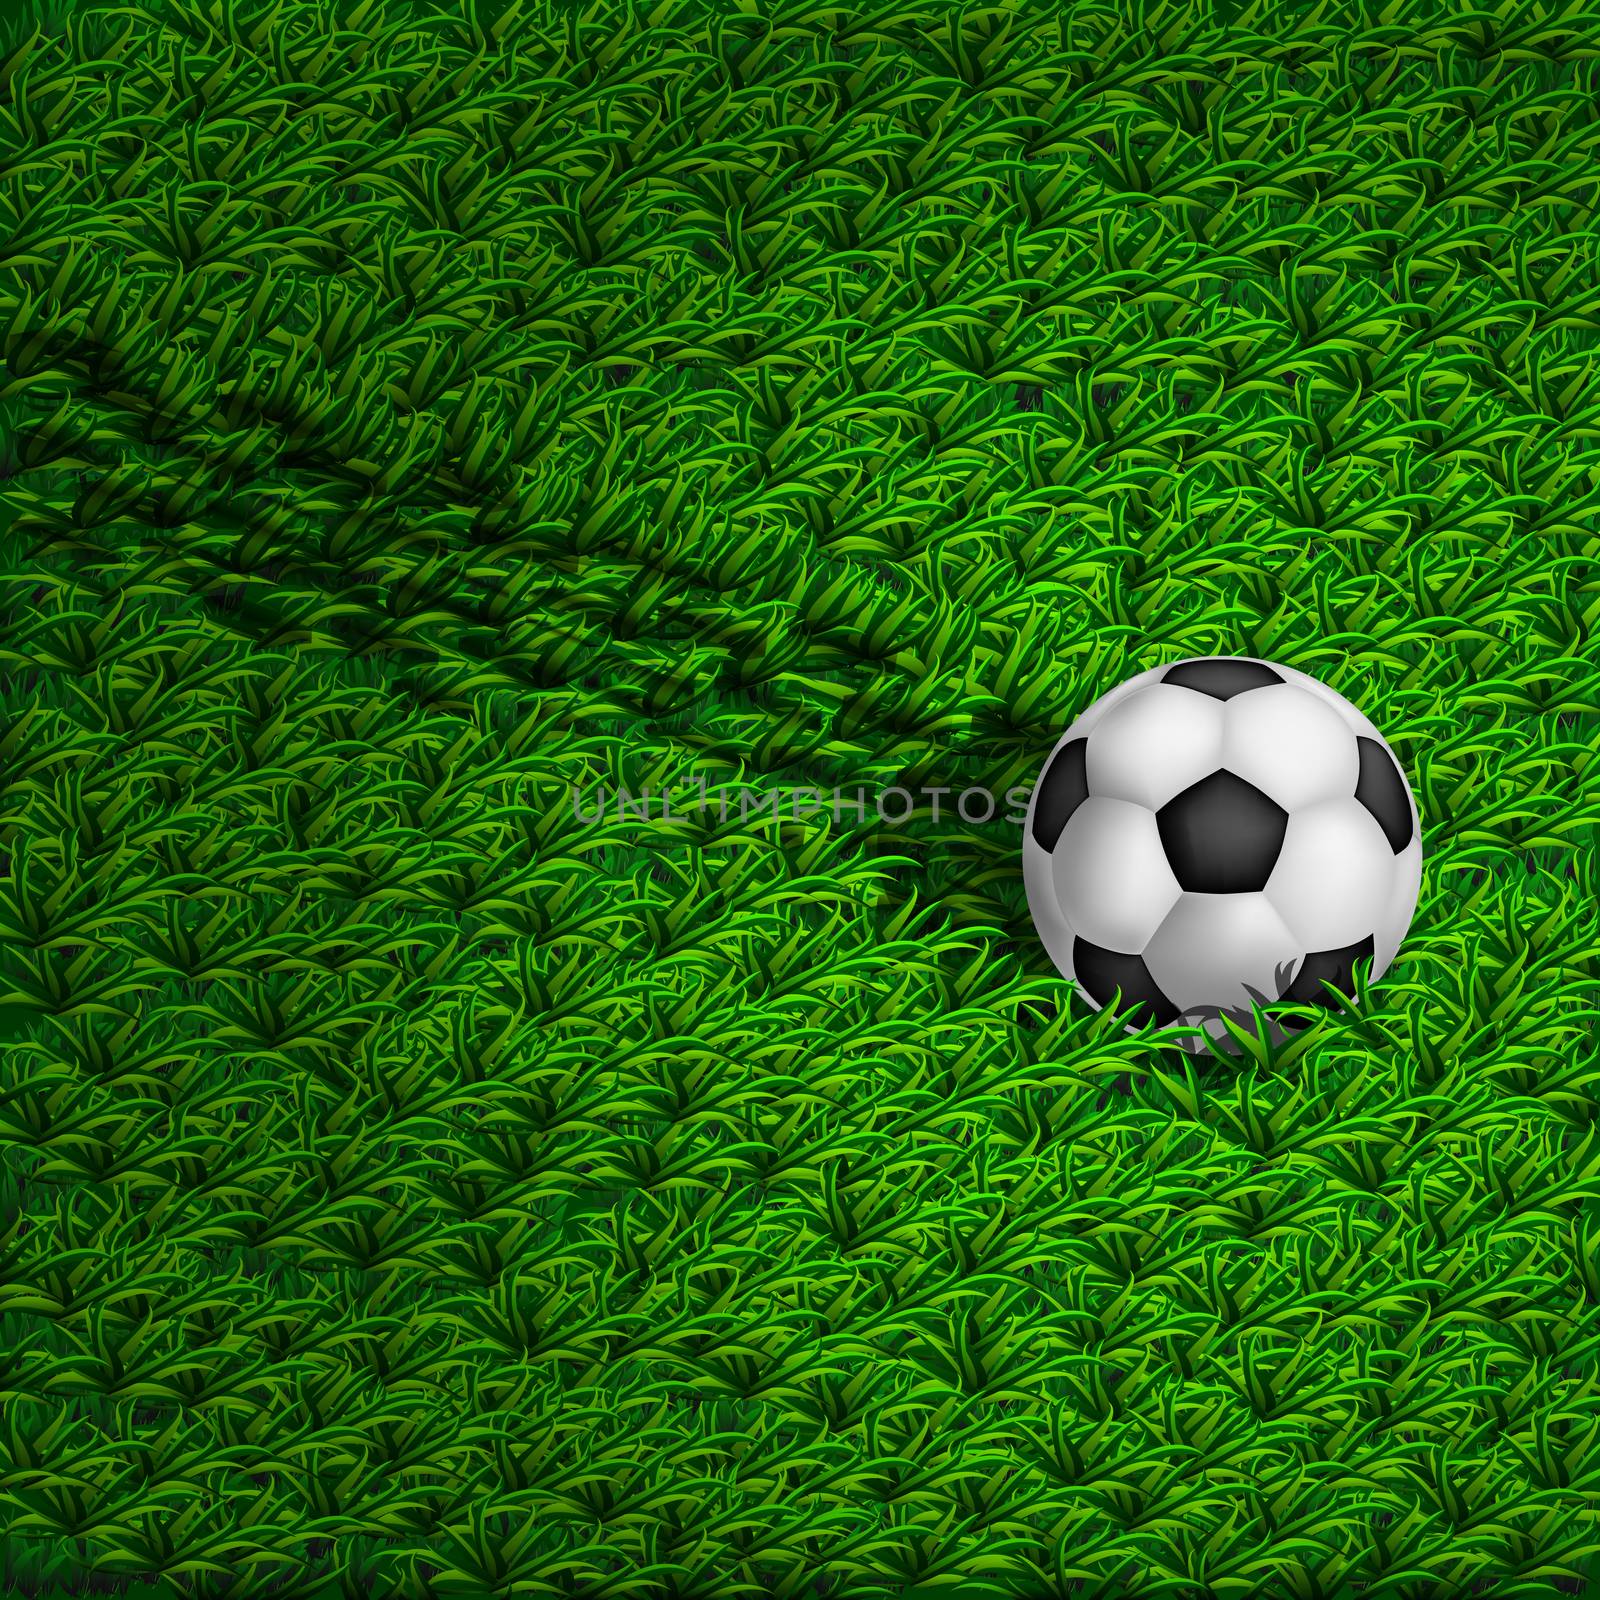 A soccer ball rolling on the grass by TimLari